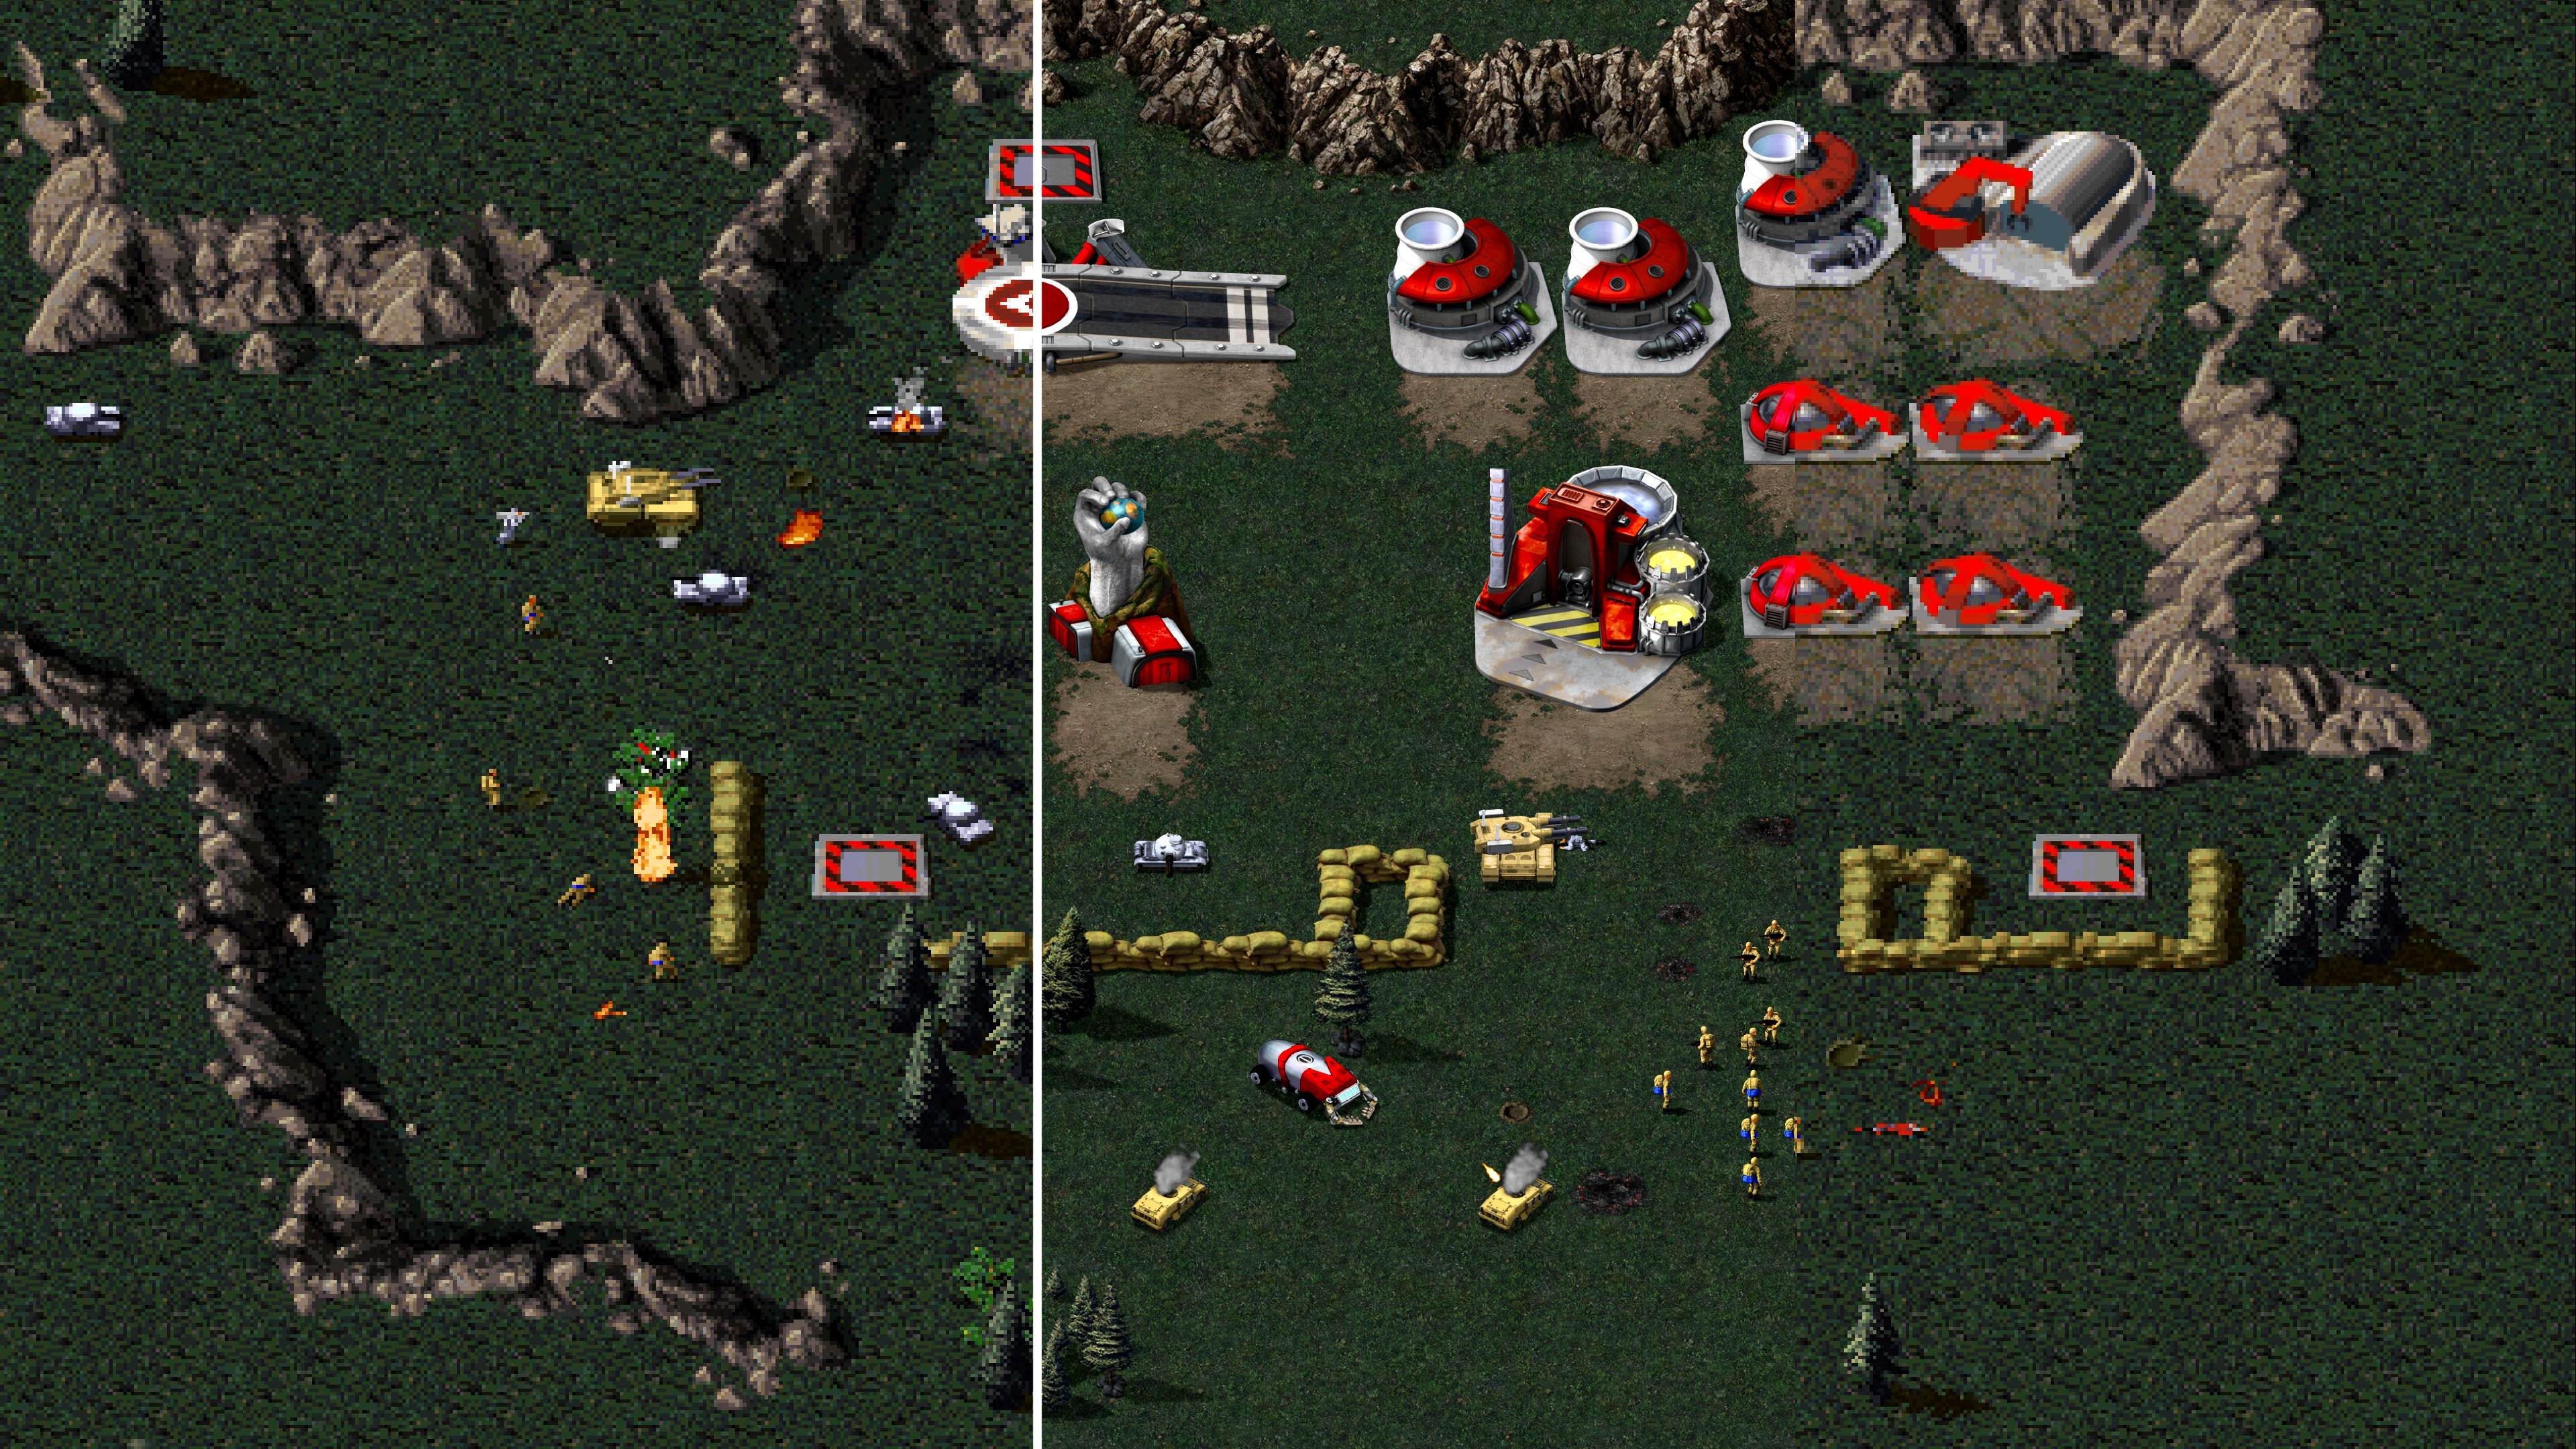 Command Conquer Remastered collection 2020. Command and Conquer 1995 Remaster. Ред Алерт 1 ремастер. Command Conquer Tiberian Dawn Remastered. Command conquer tm red alert tm